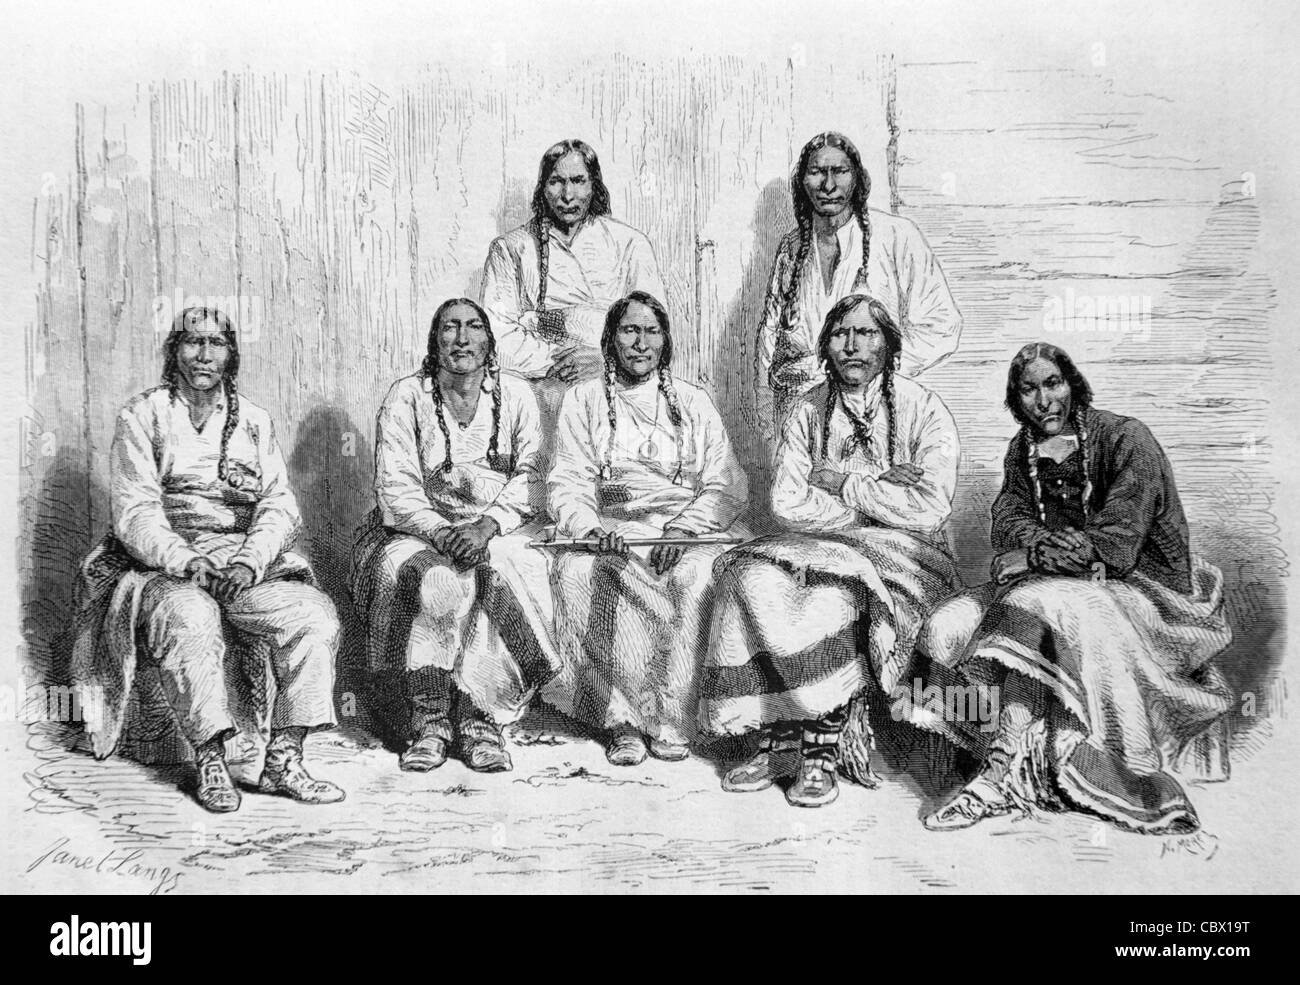 Seven Cheyenne & Arapaho Native American Indian Chiefs in Denver (1863) to Discuss Treaty with the Governor of Colorado. Vintage Illustration or Engraving Stock Photo